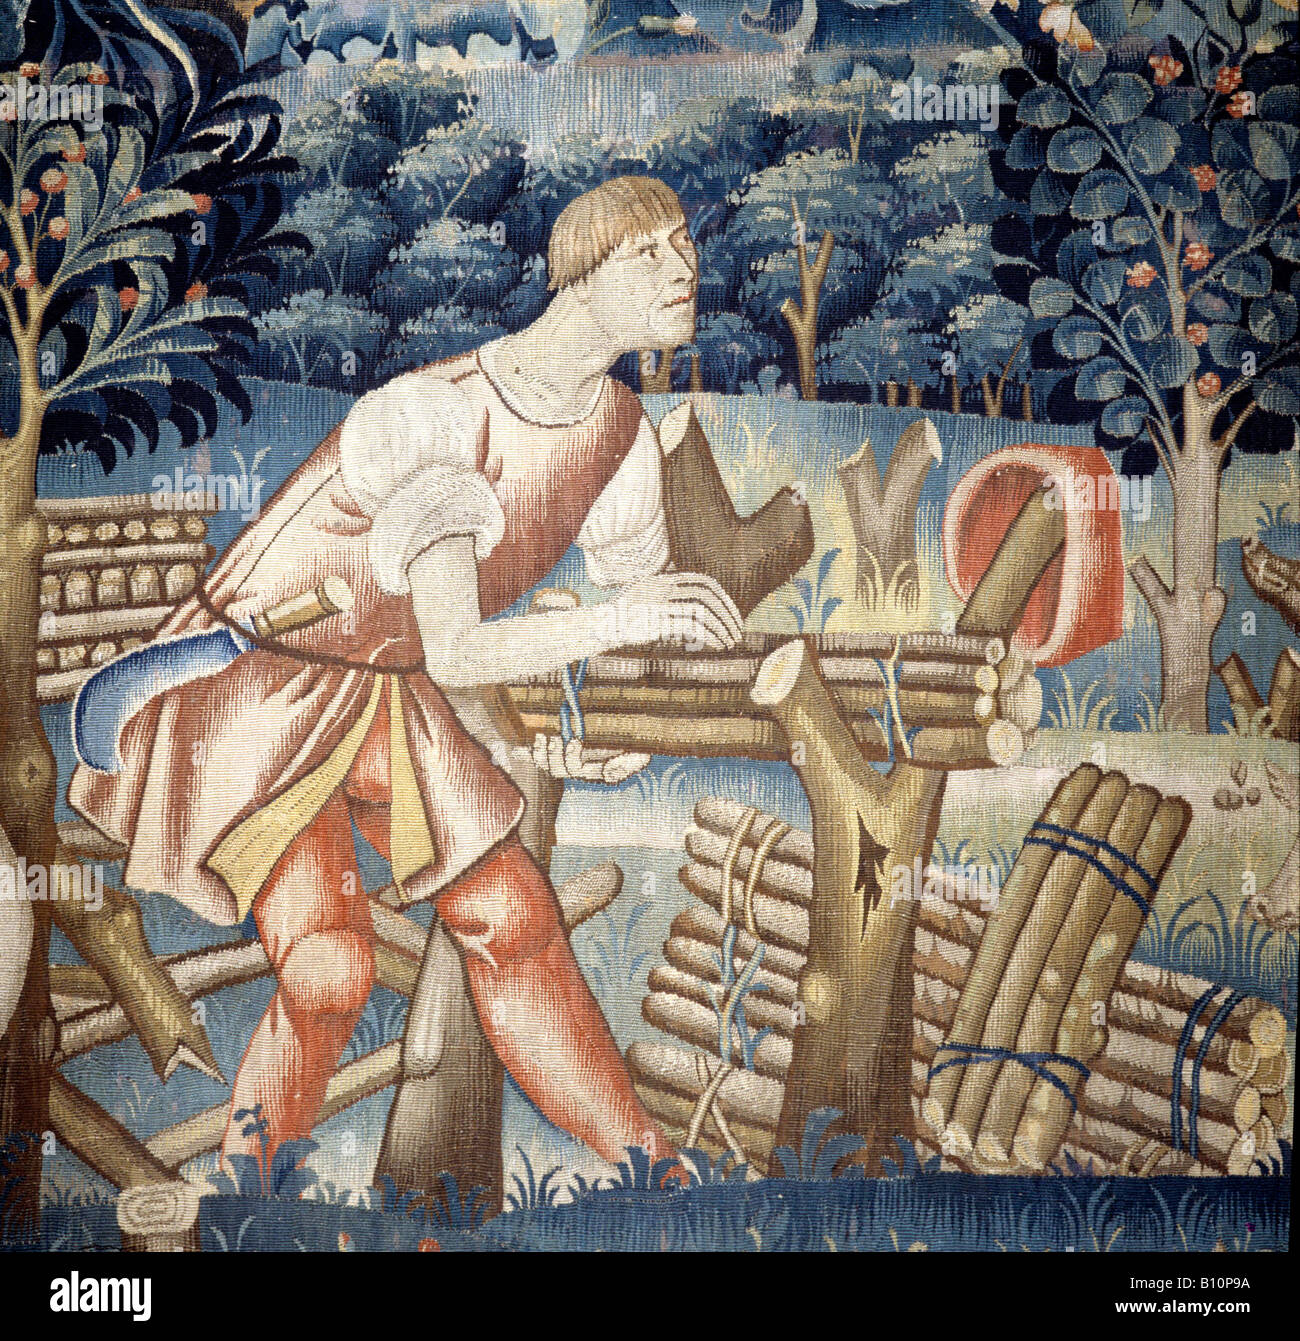 Flemish Tapestry woodcutter Le Main Chaud Early 16th century. Belgium Stock Photo